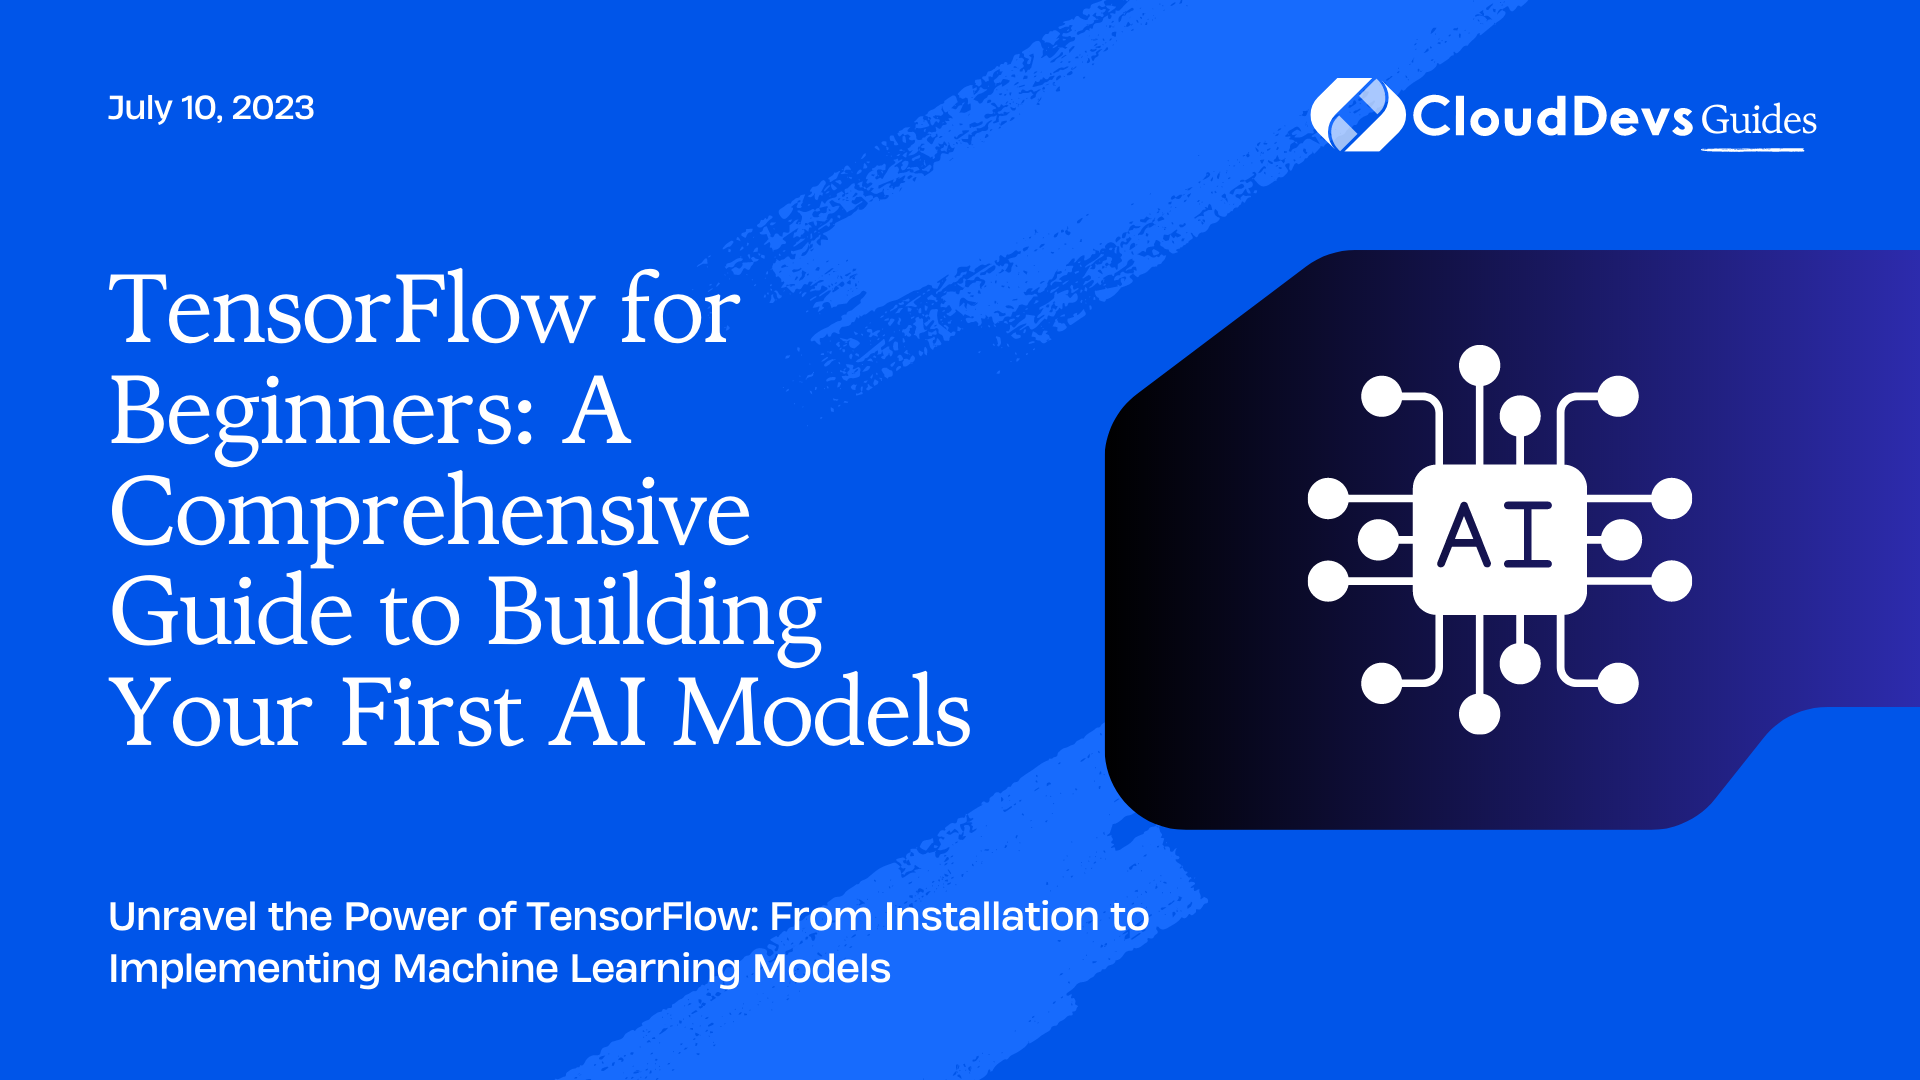 TensorFlow for Beginners: A Comprehensive Guide to Building Your First AI Models